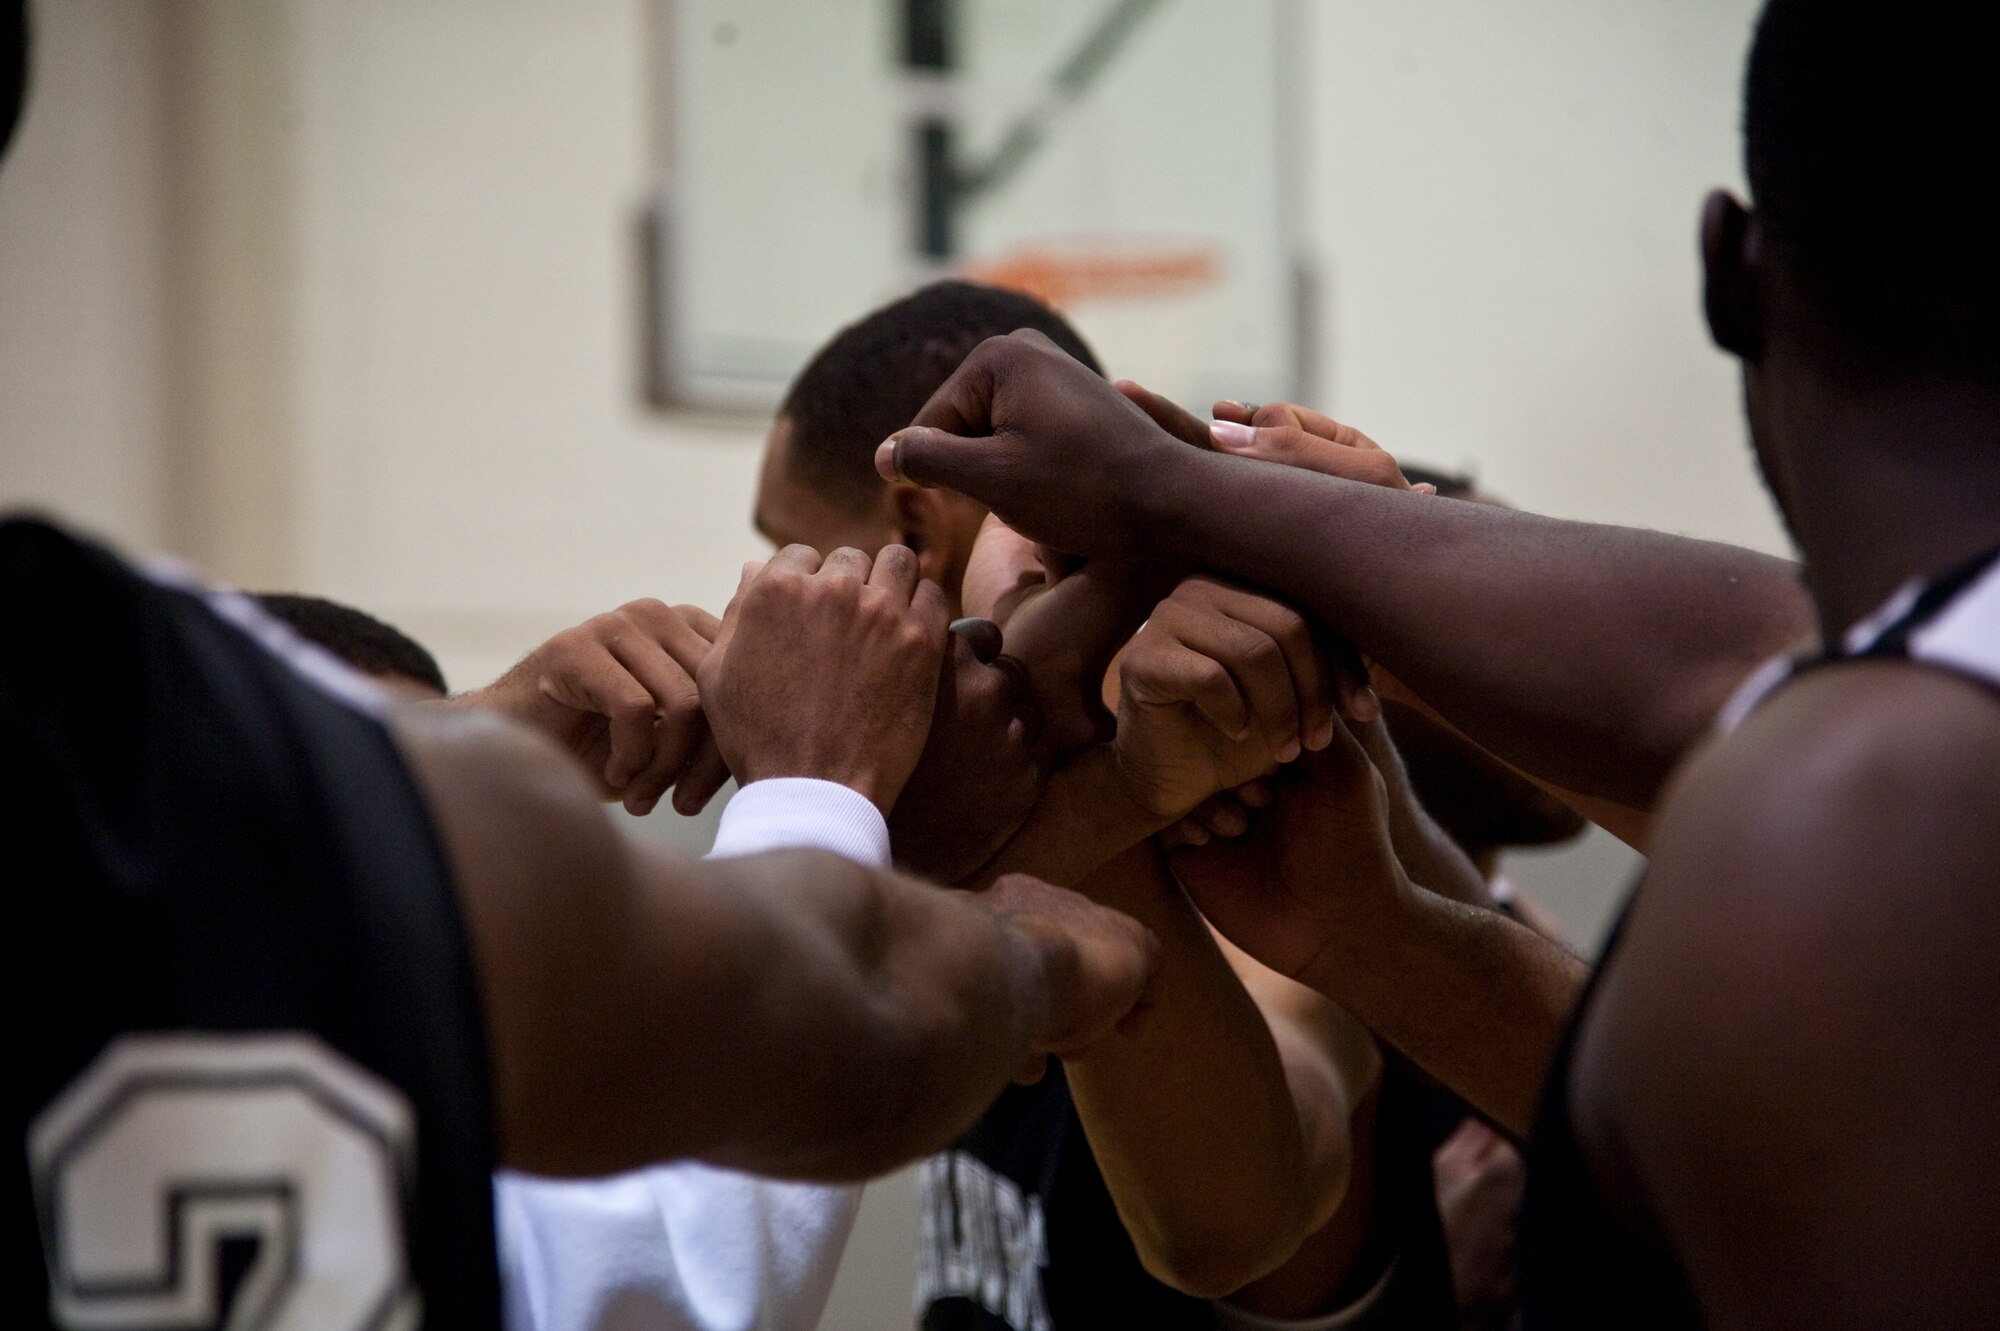 The Hurlburt Field Commandos basketball team, huddle during a time-out at the Aderholt Fitness Center on Hurlburt Field, Fla., Jan. 21, 2013. Hurlburt Field held the basketball tournament to commemorate and celebrate Martin Luther King Day. (U.S. Air Force photo/ Airman 1st Class Nigel Sandridge)